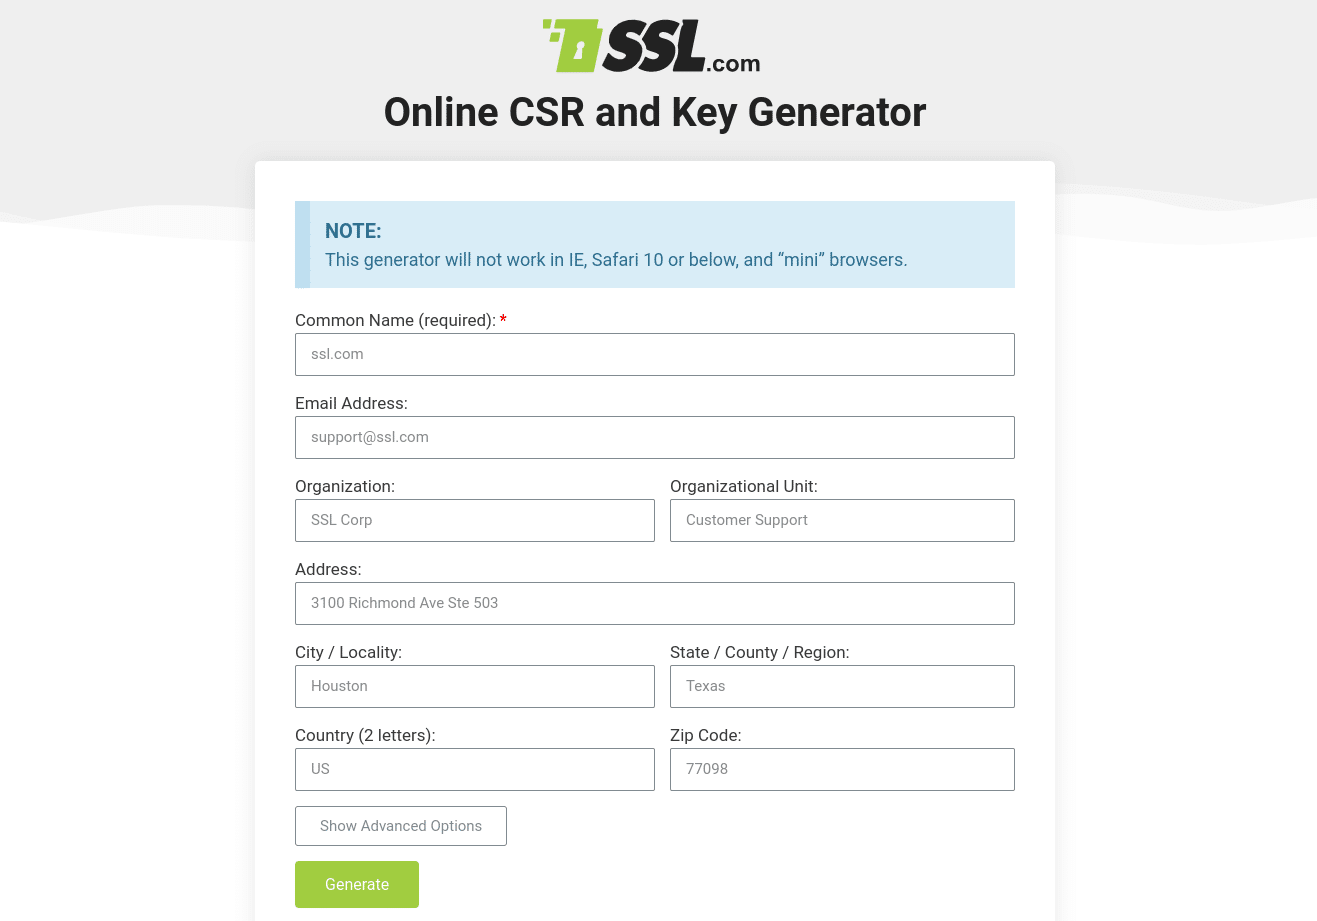 The Online CSR and Key Generator form.